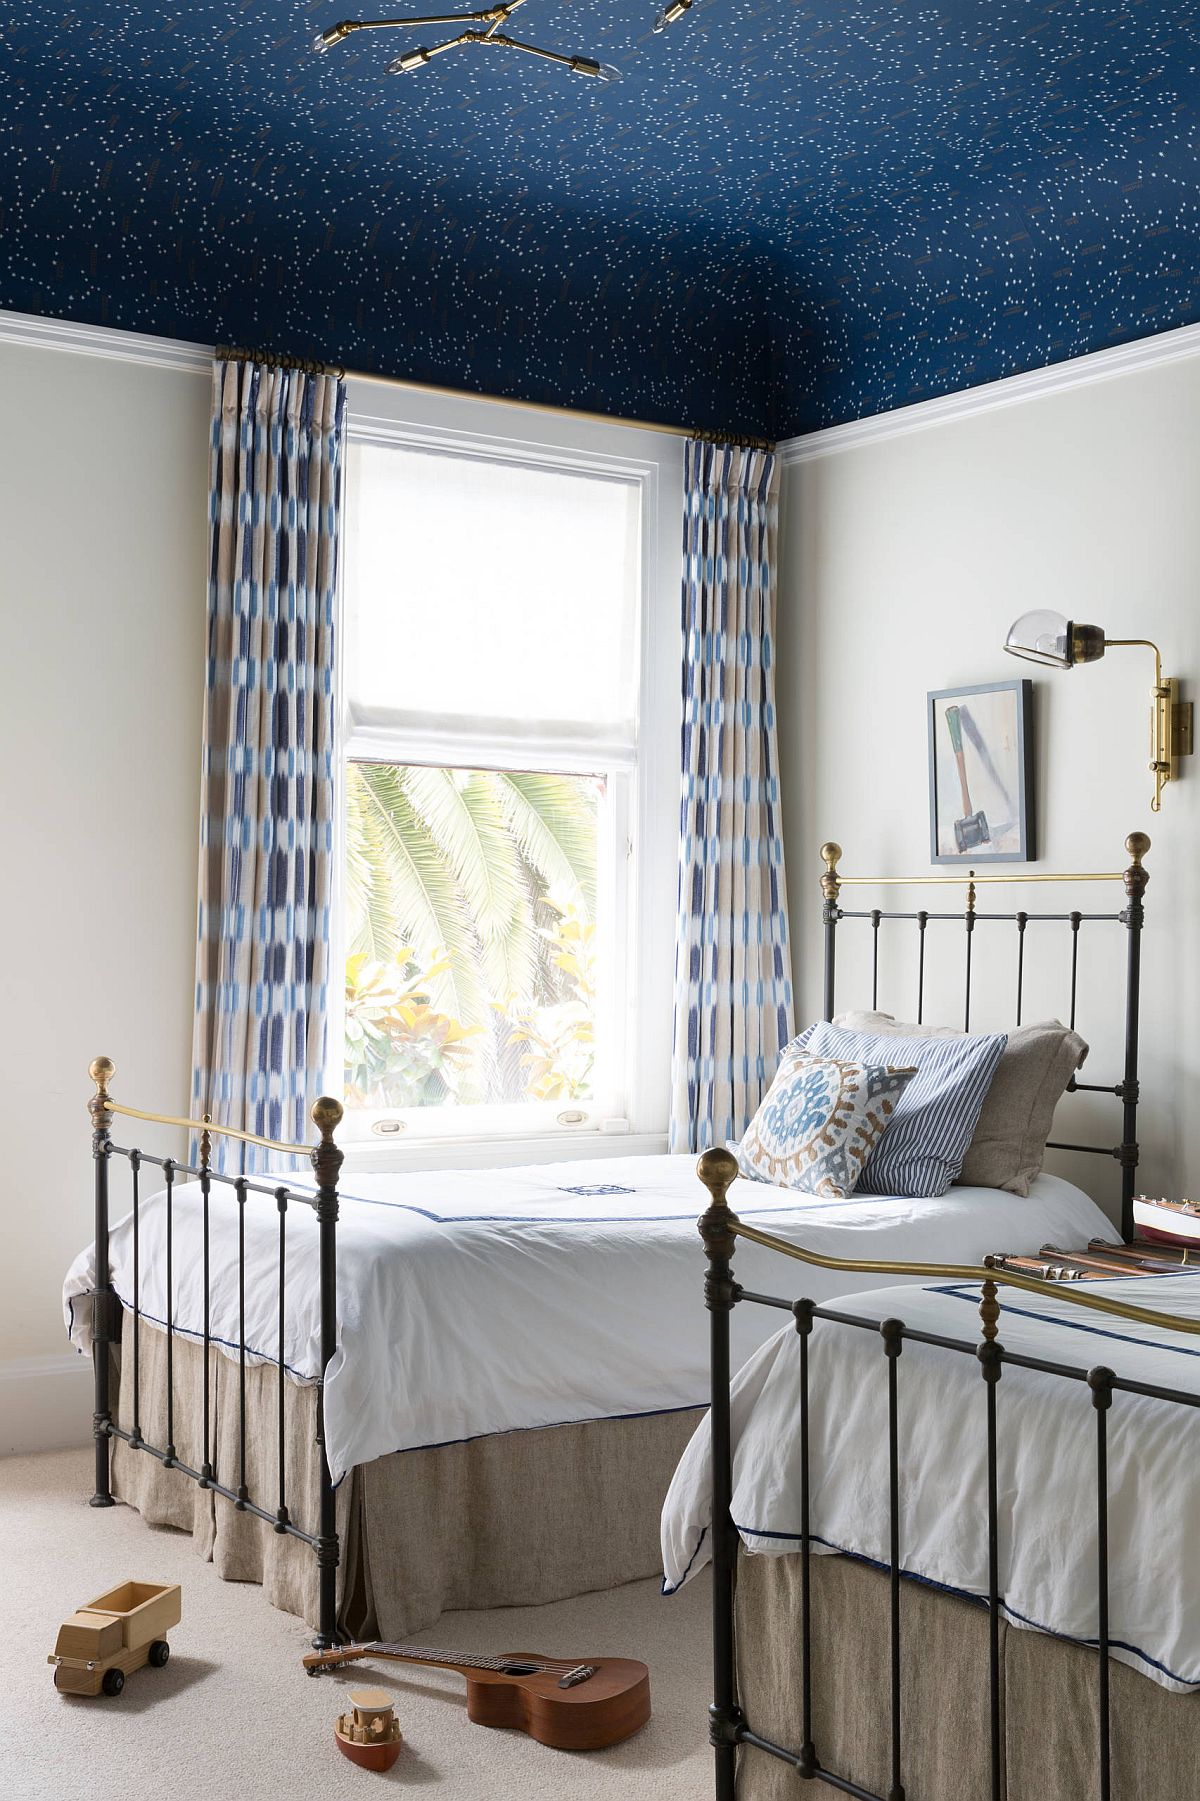 Dashing-dark-blue-wallpaper-on-the-ceiling-adds-bright-color-to-this-kids-bedroom-29292